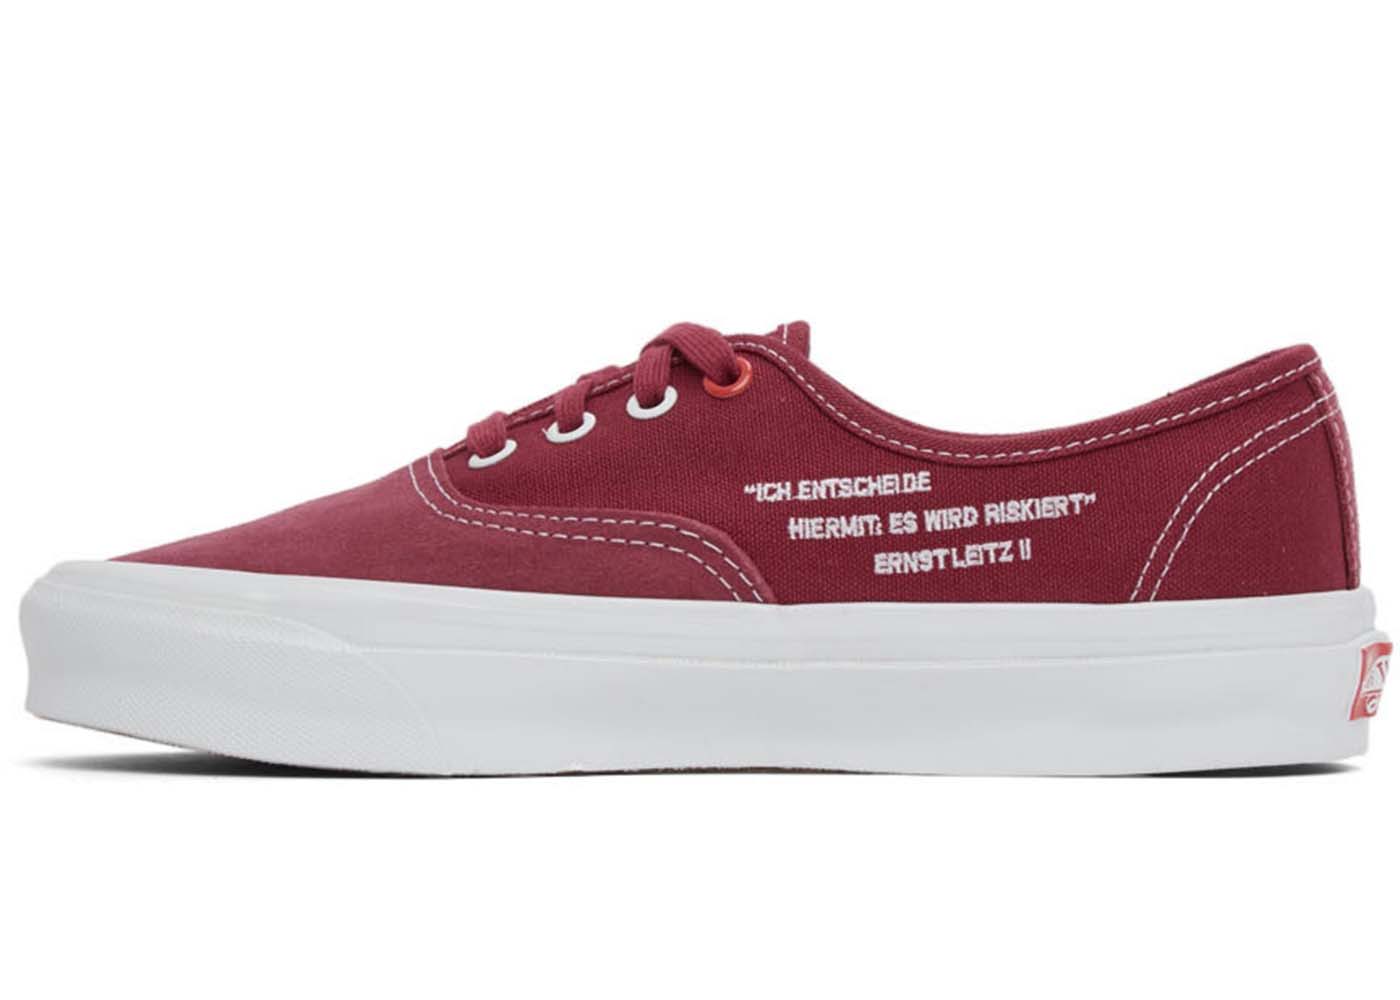 Vans OG Authentic LX Ray Barbee Leica Red Men's - VN0A4BV991Y - US